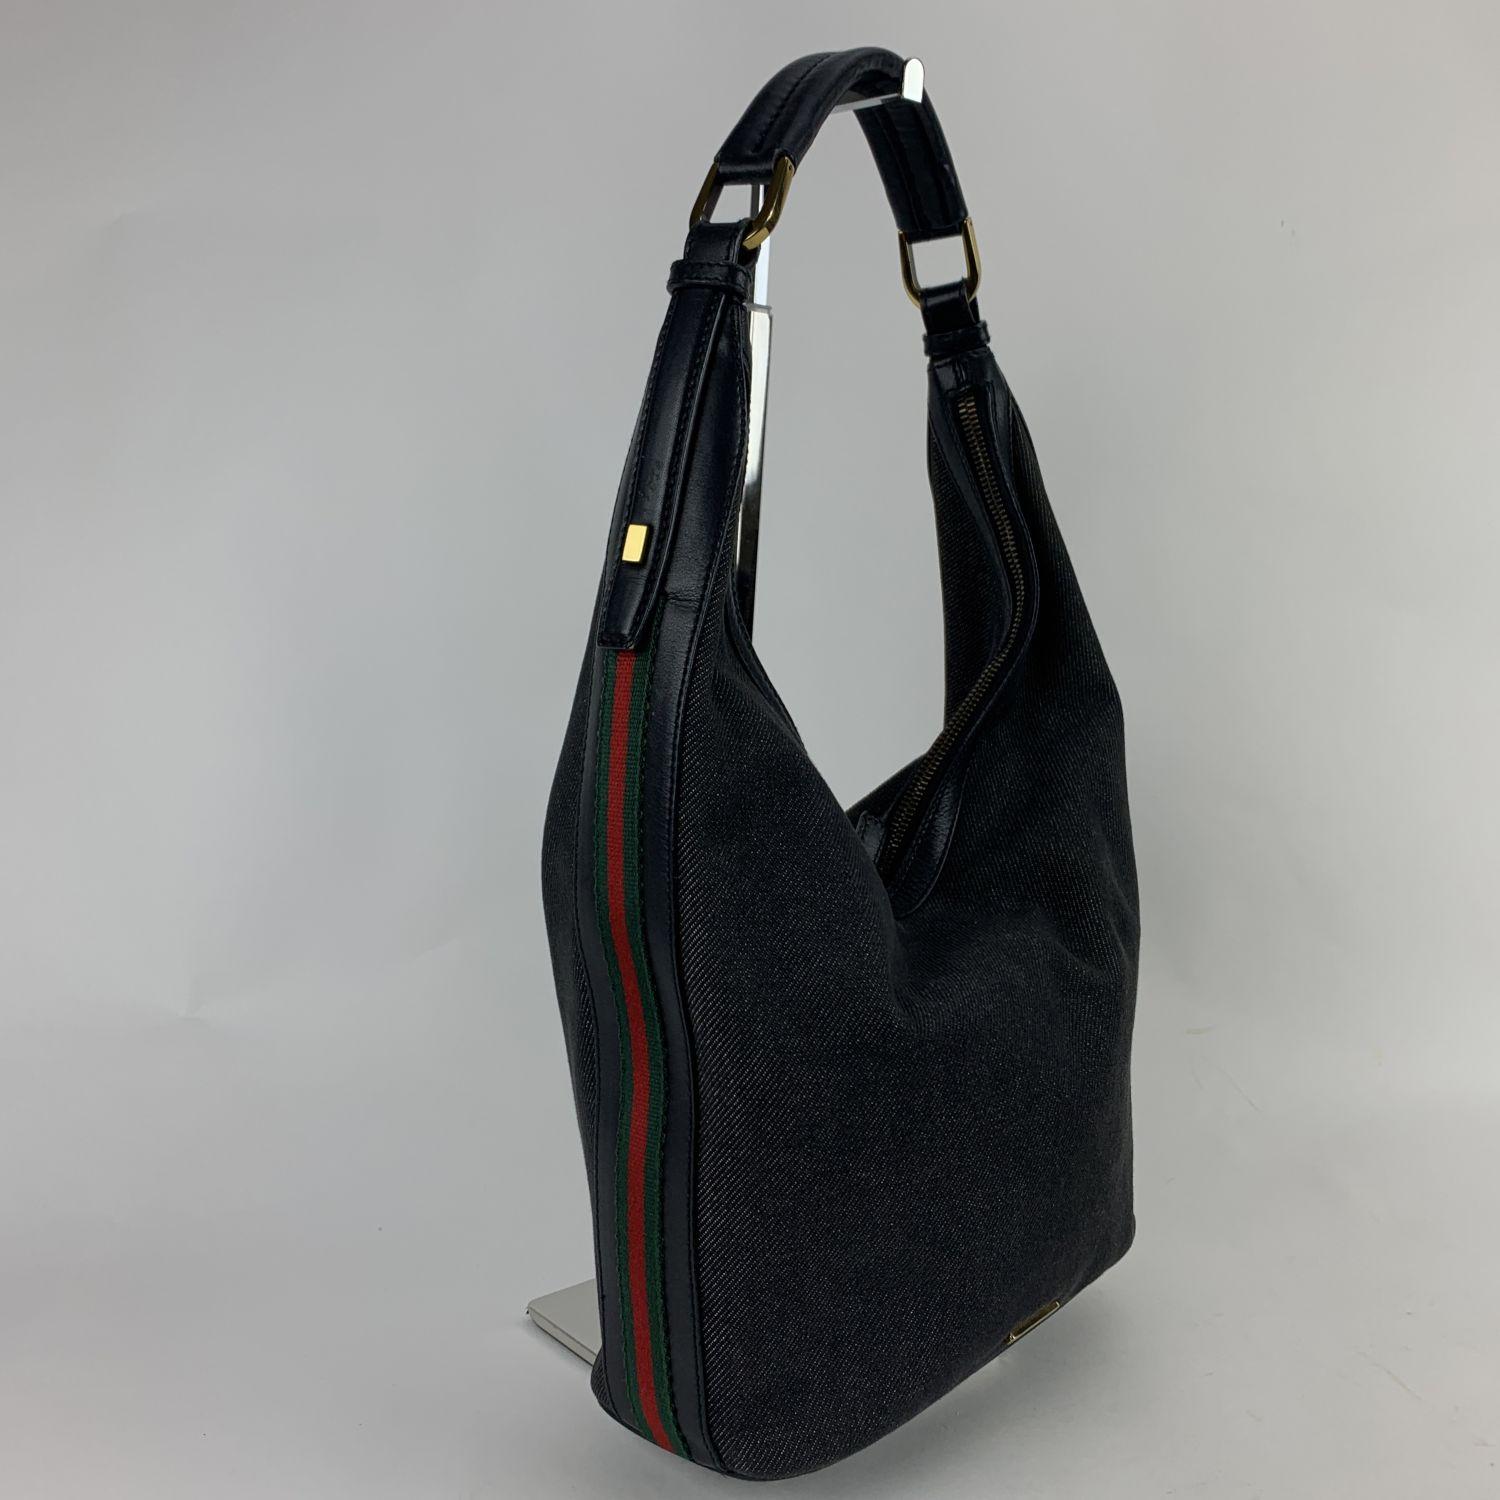 Gucci Black Canvas Hobo Shoulder Bag Tote with Stripes In Excellent Condition In Rome, Rome